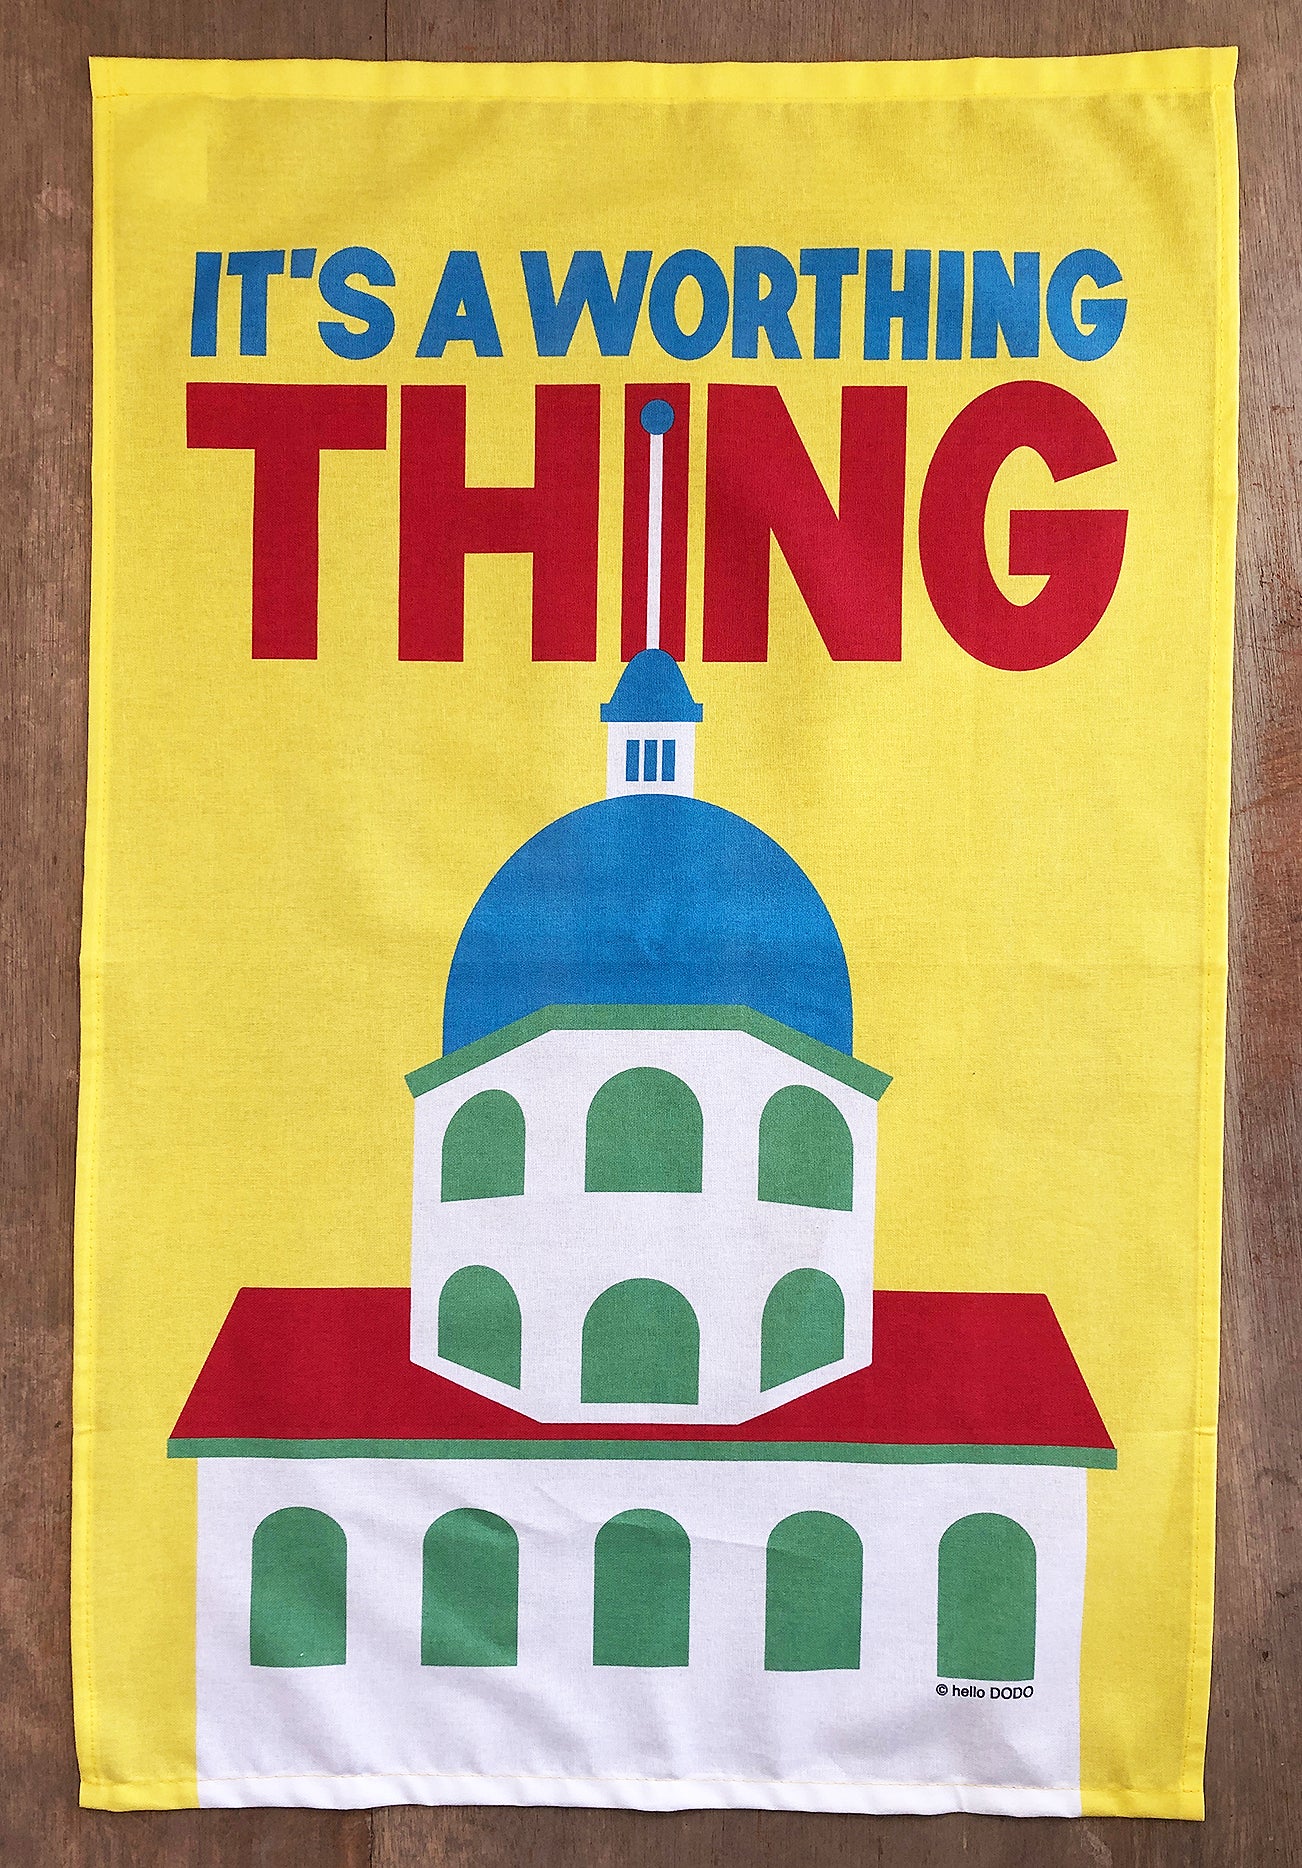 It's A Worthing Thing tea towel